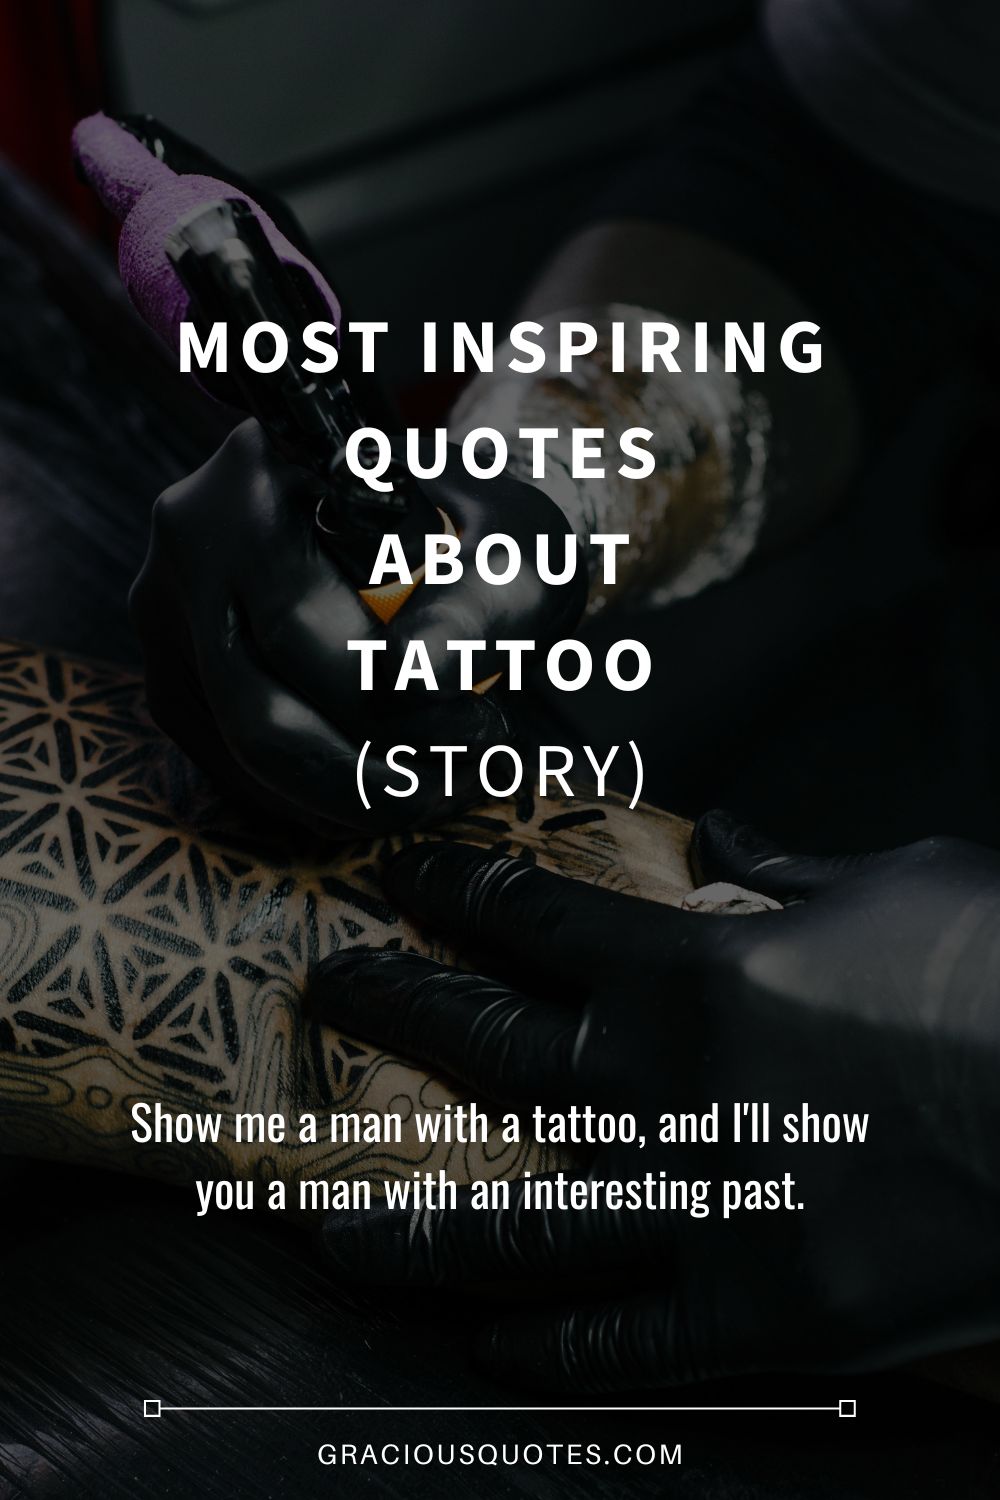 most Inspiring Quotes About Tattoo (STORY) - Gracious Quotes